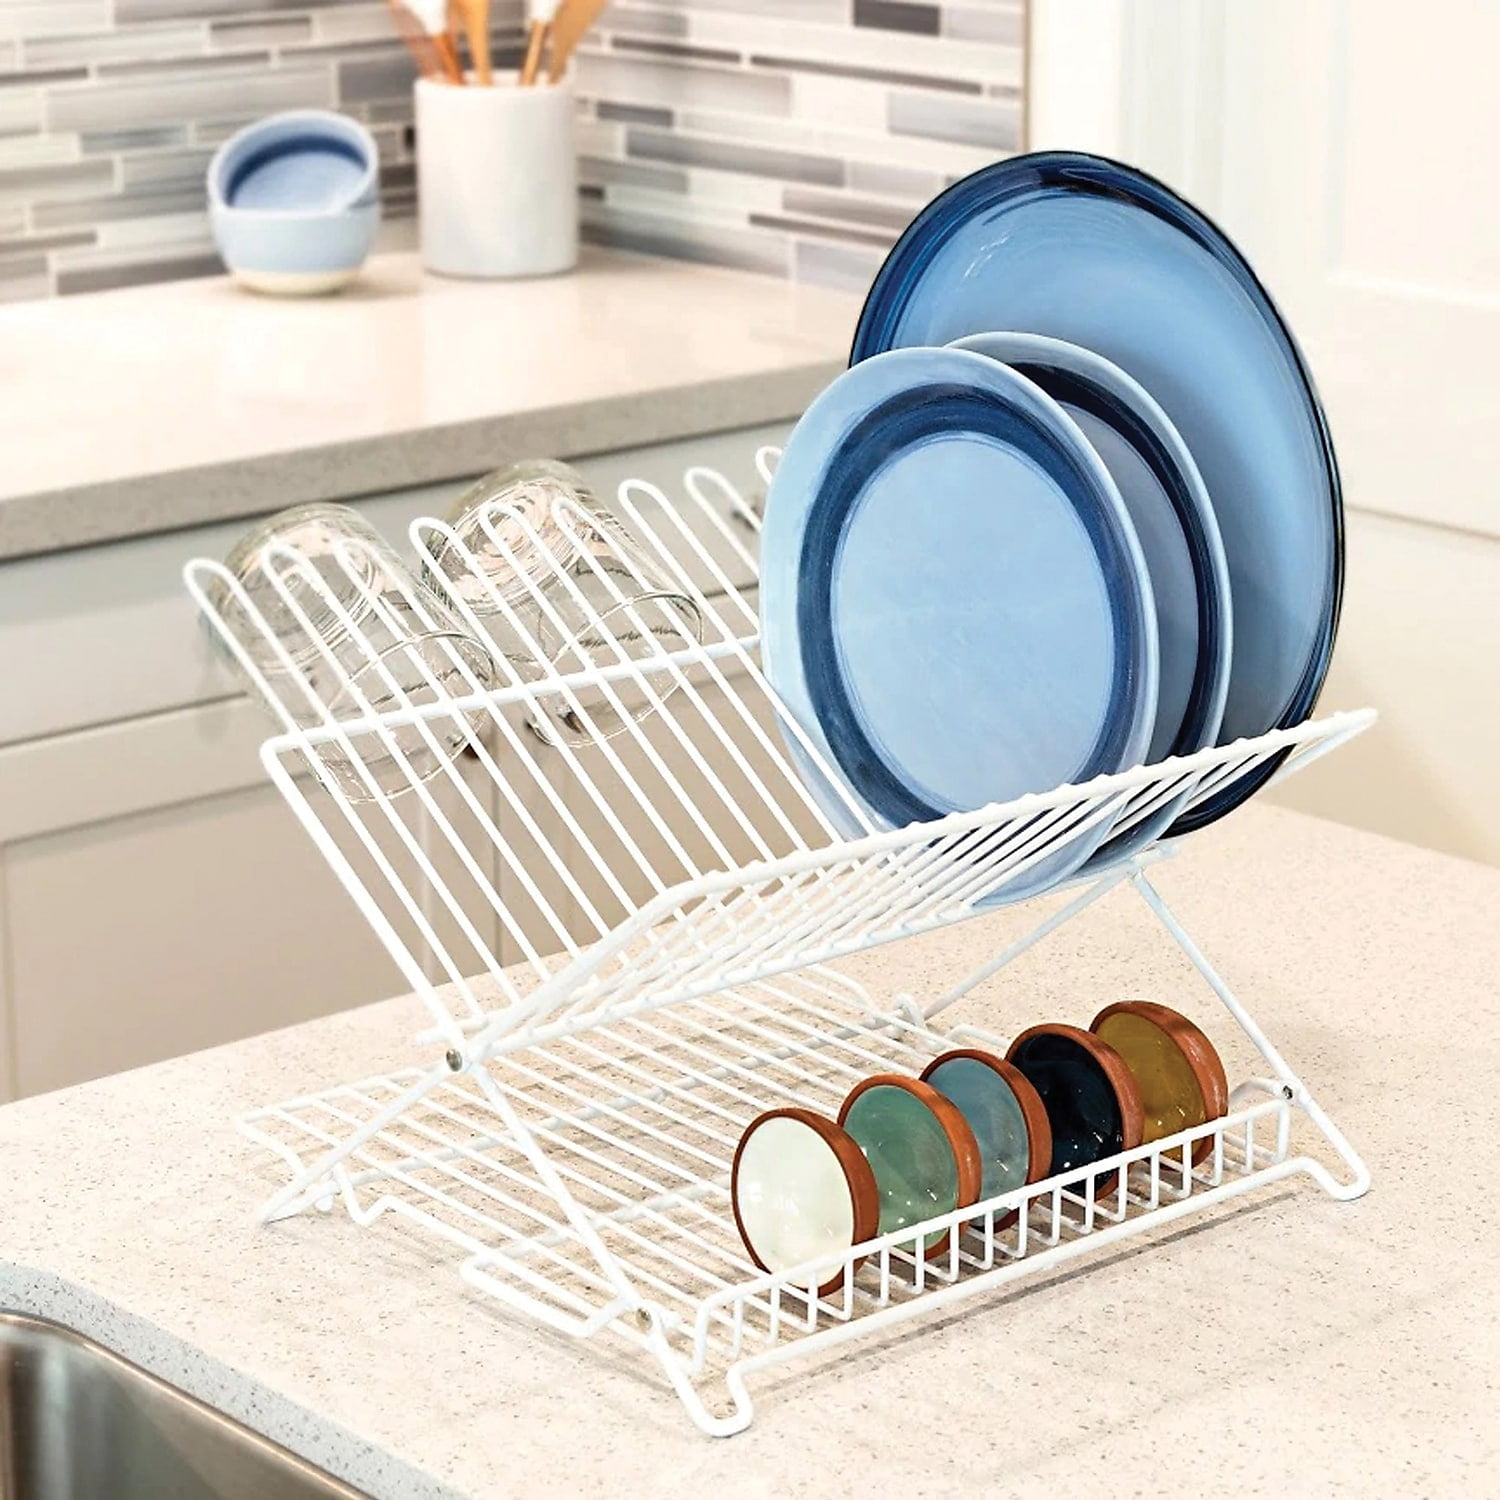 Bigdata&BetterLife Multipurpose Roll Up Dish Drying Rack White Dish Drying Mat with Rack for Kitchen,Heavy Duty Foldable Silicone-Coated Stainless